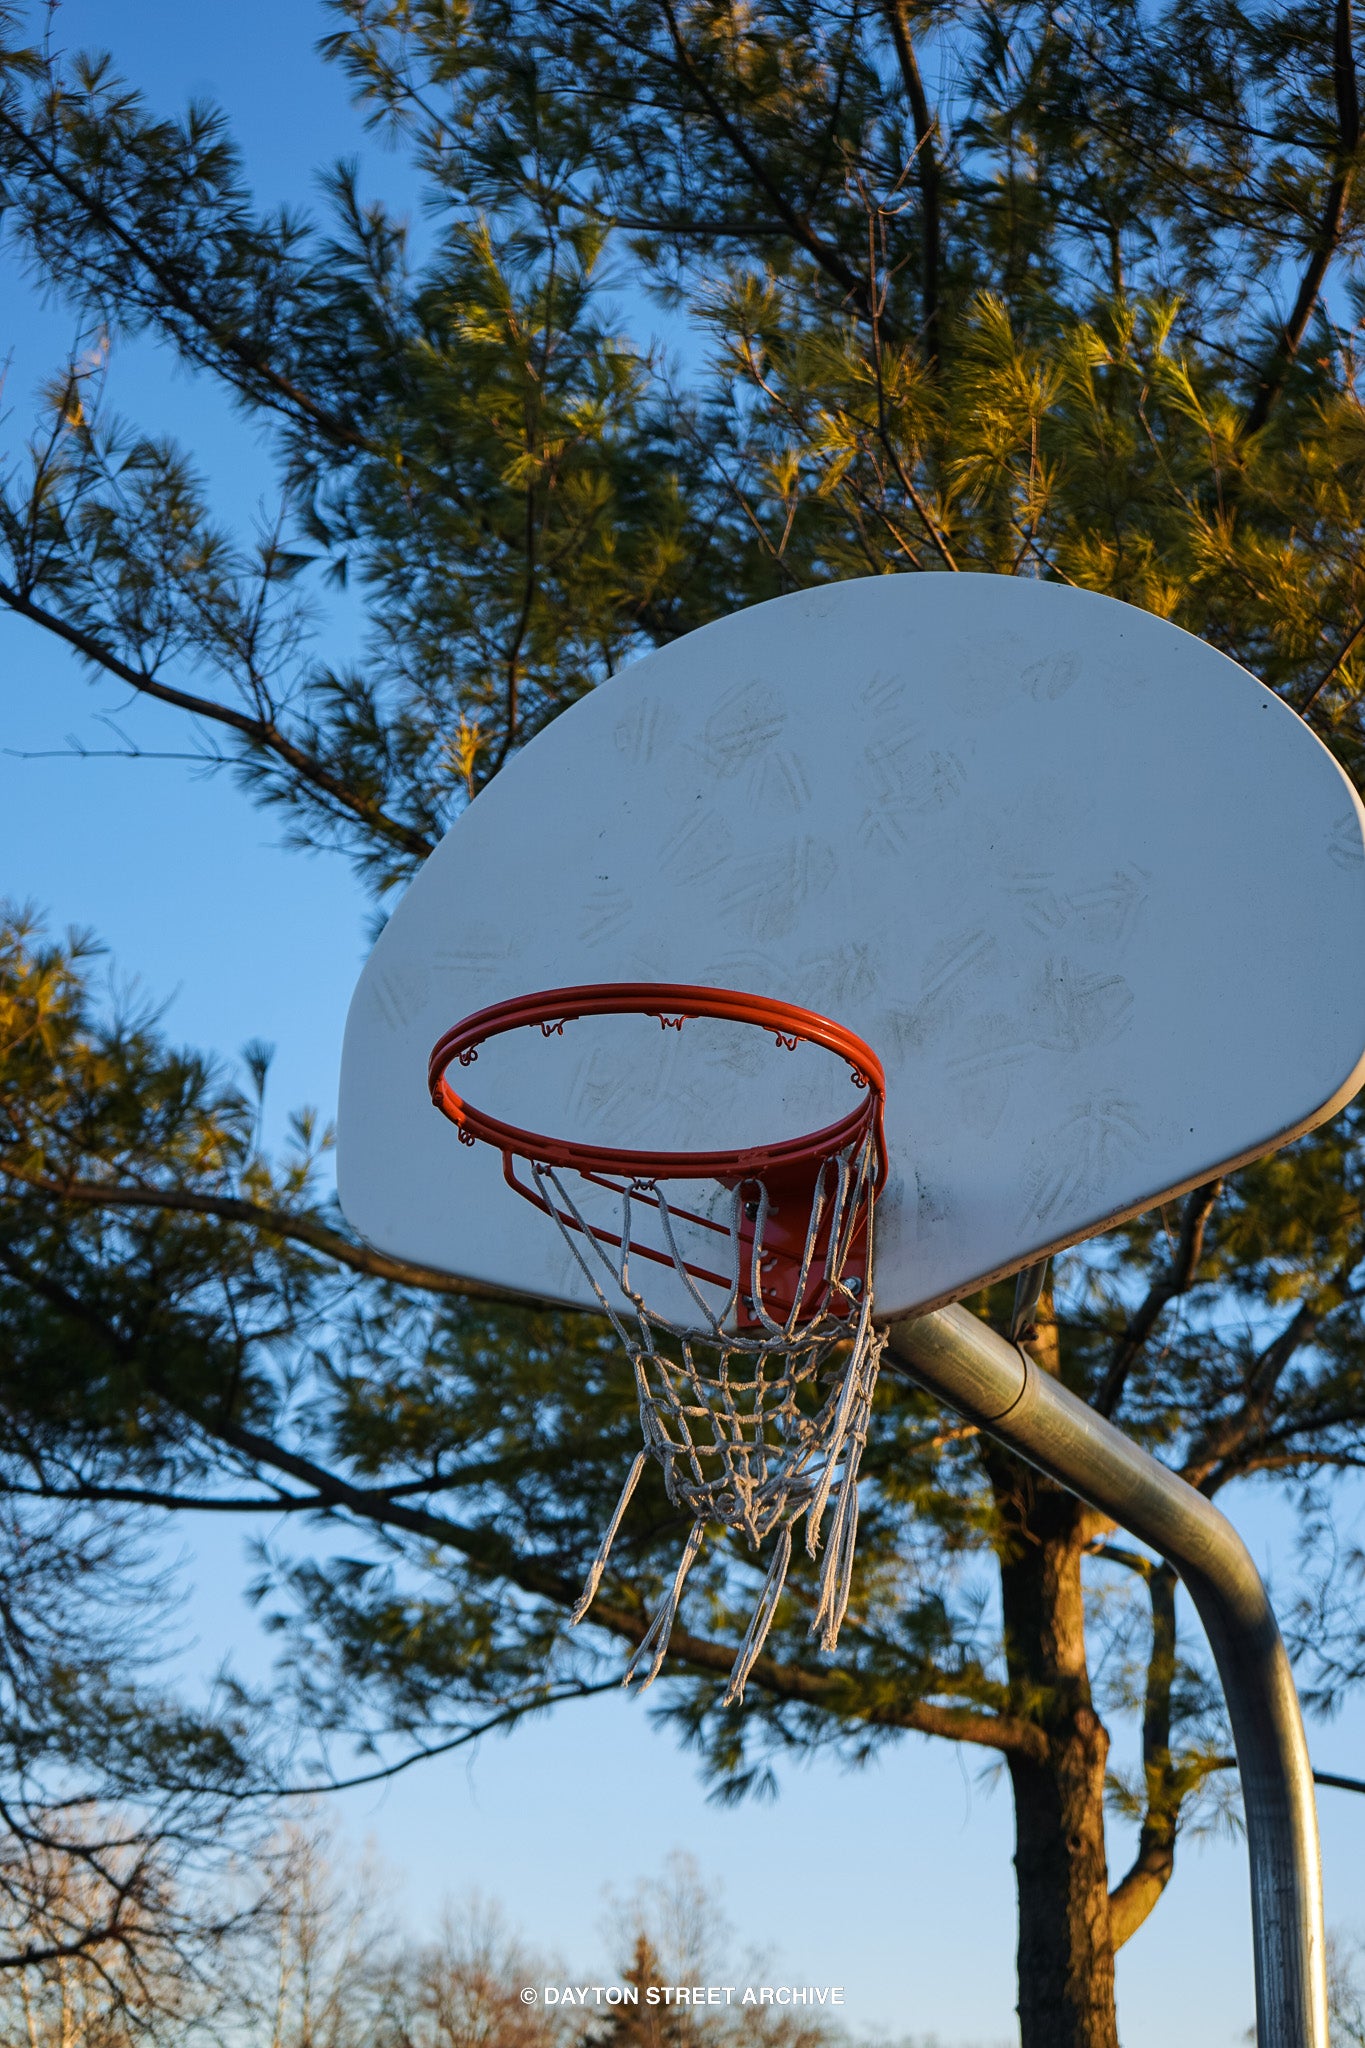 high quality up close basketball hoop with worn net with blue sky and trees